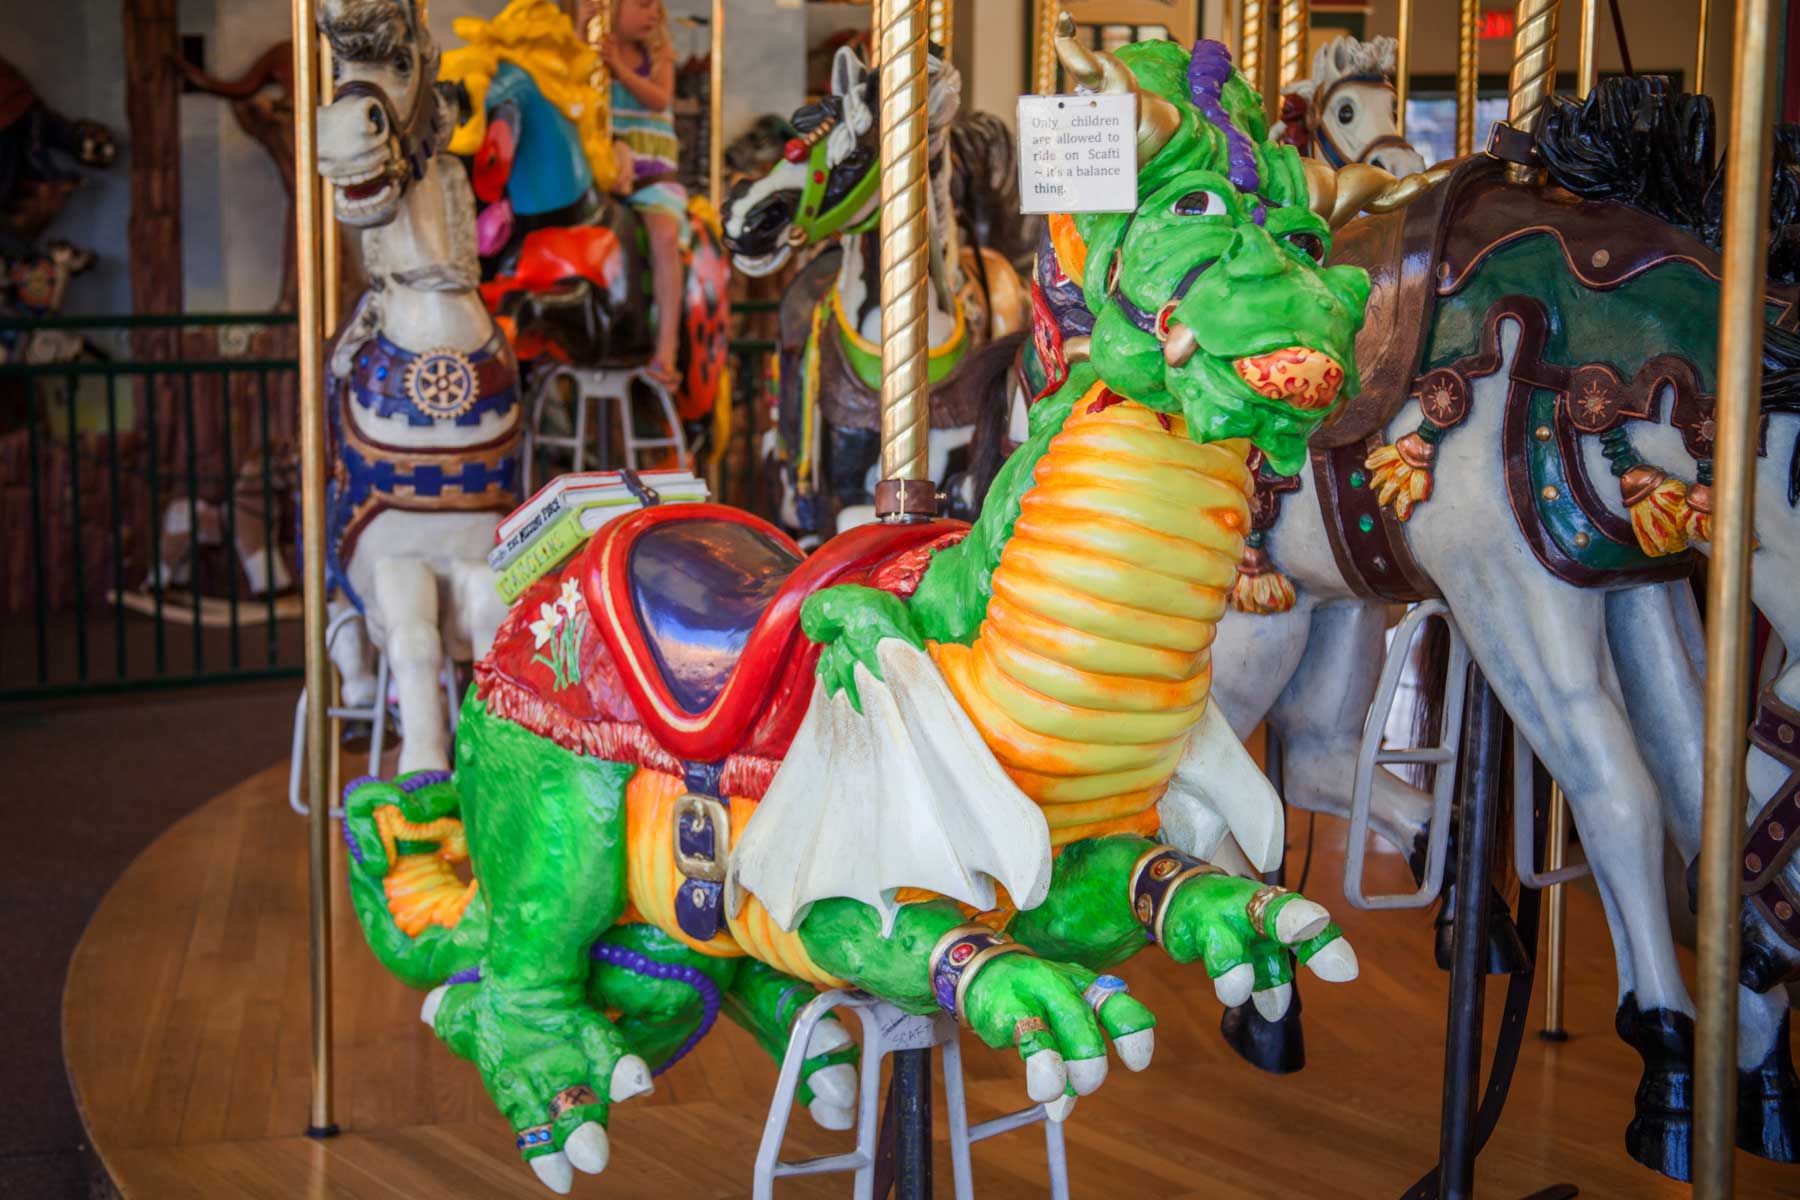 Scafti the Dragon at a Carousel for Missoula